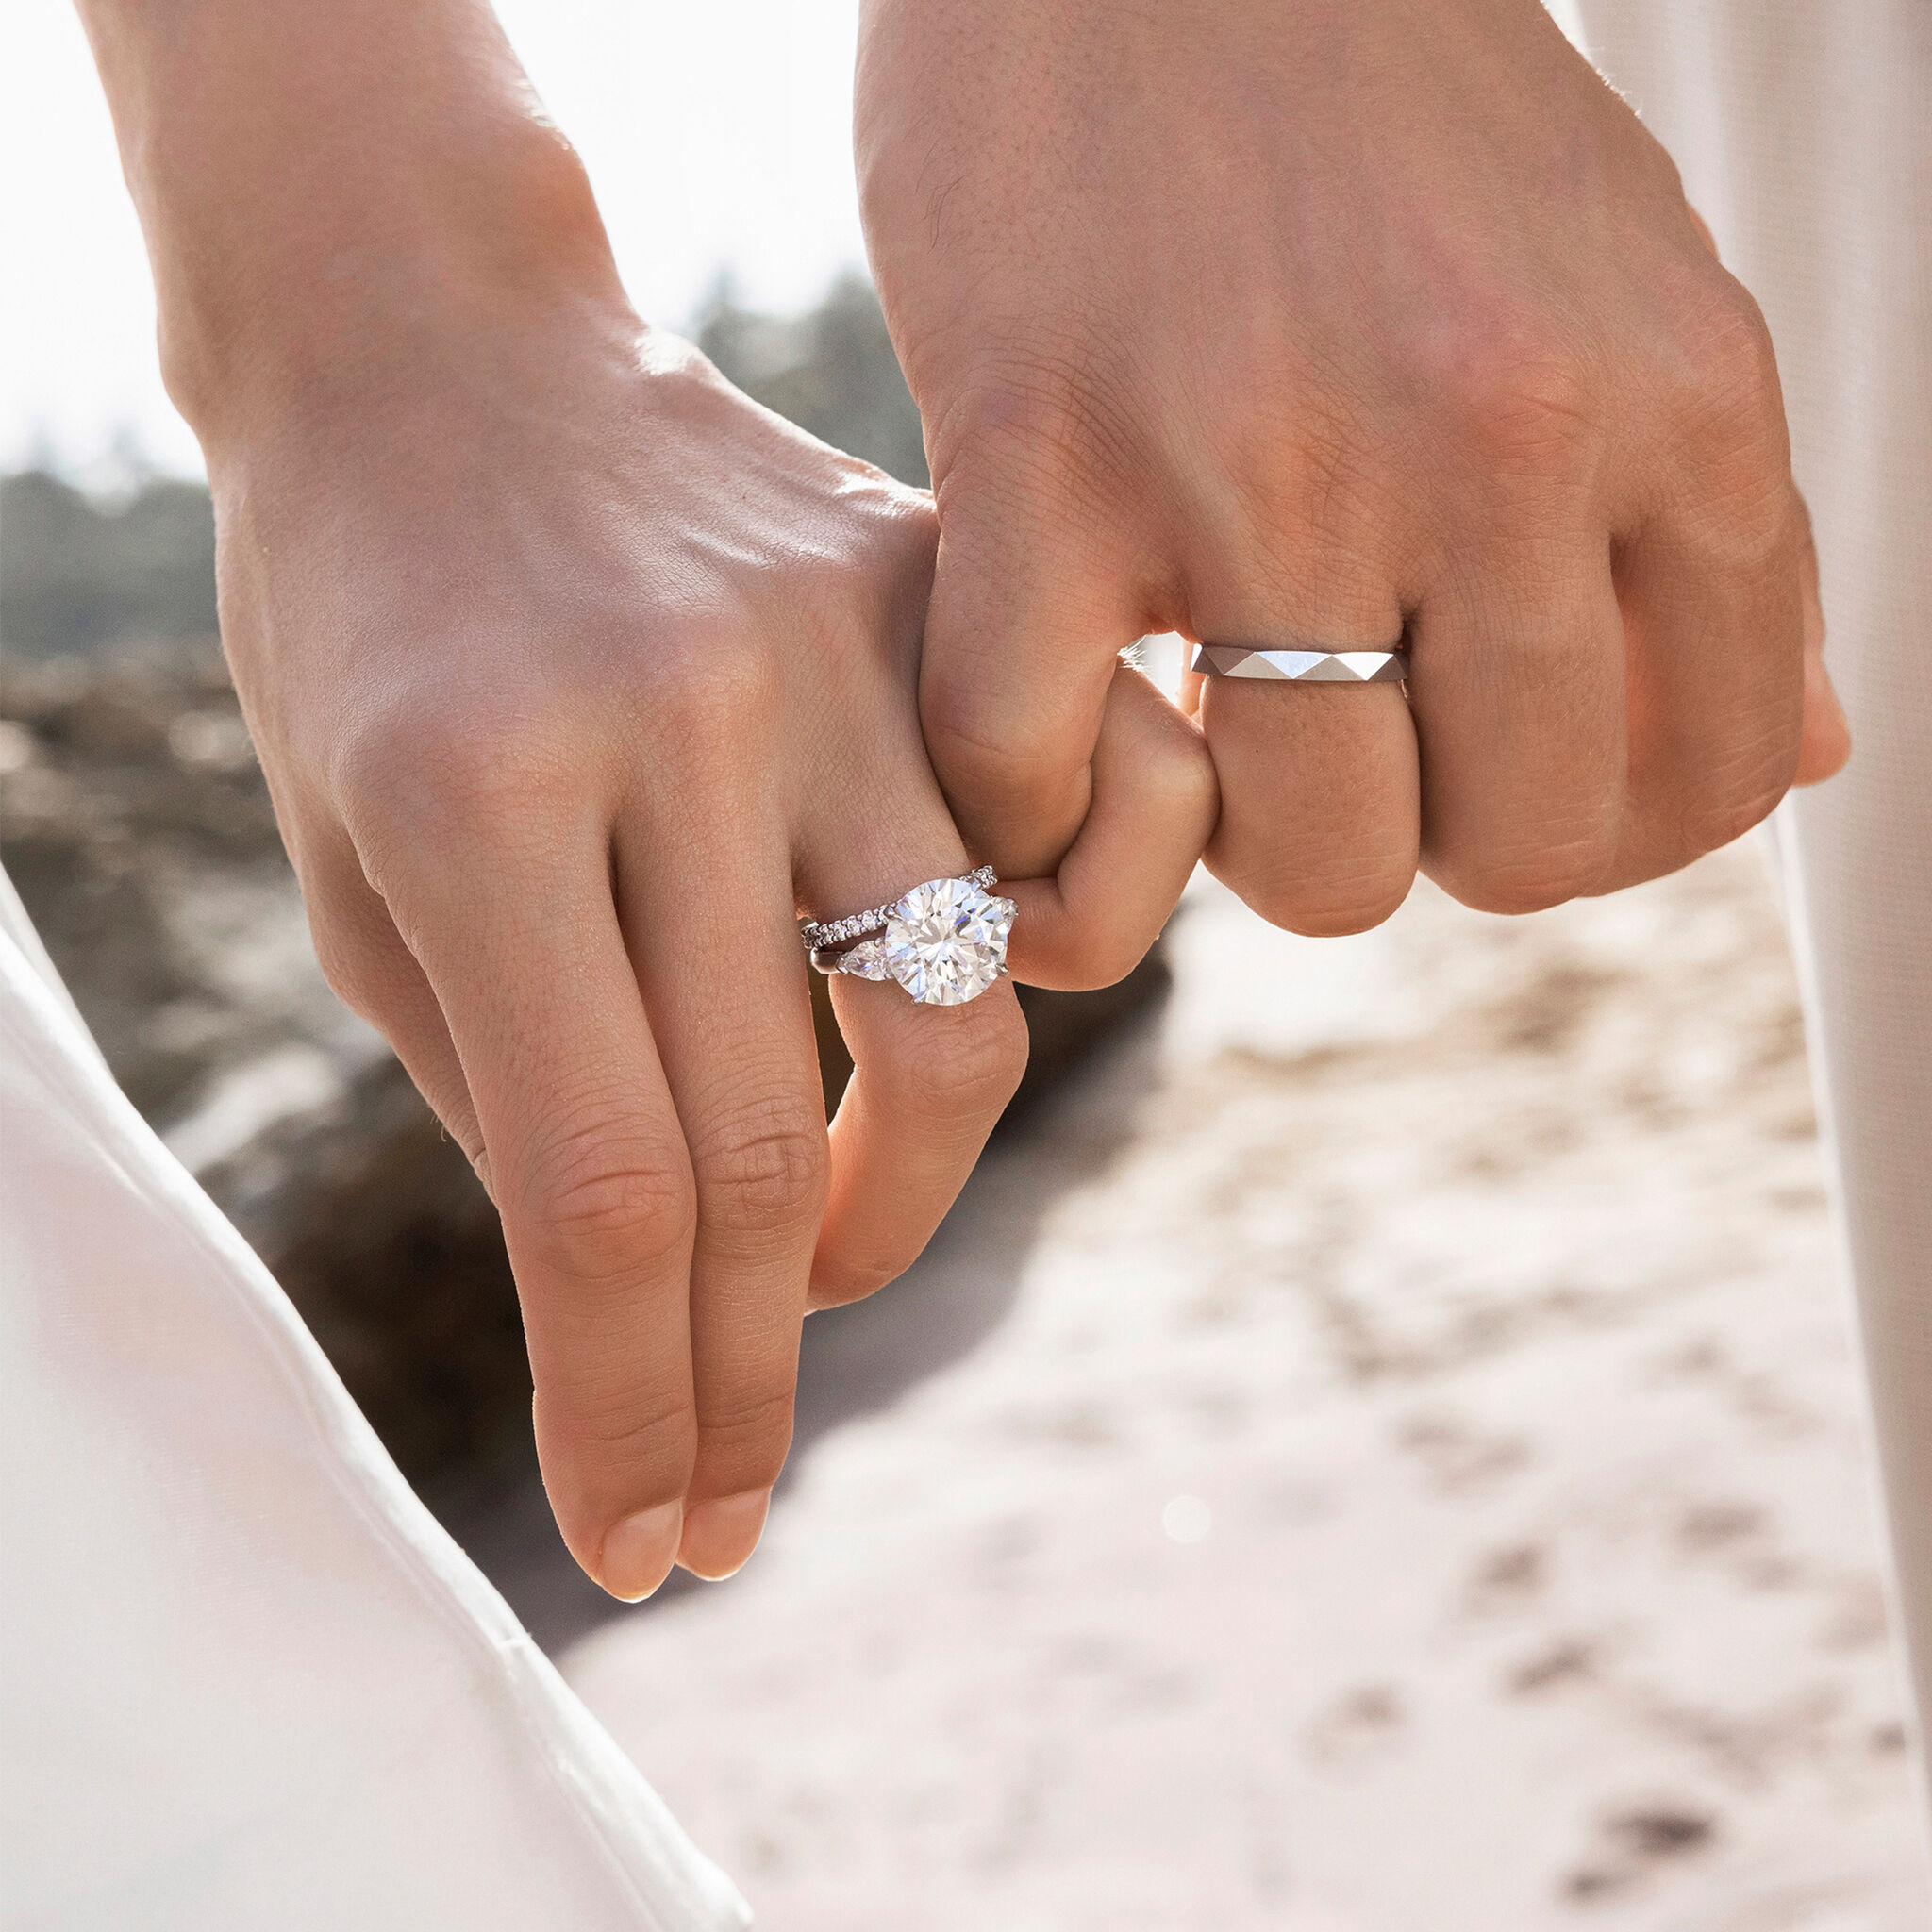 Couple wearing bridal jewellery from Graff, including a promise round diamond engagement ring and Laurence Graff Signature band.